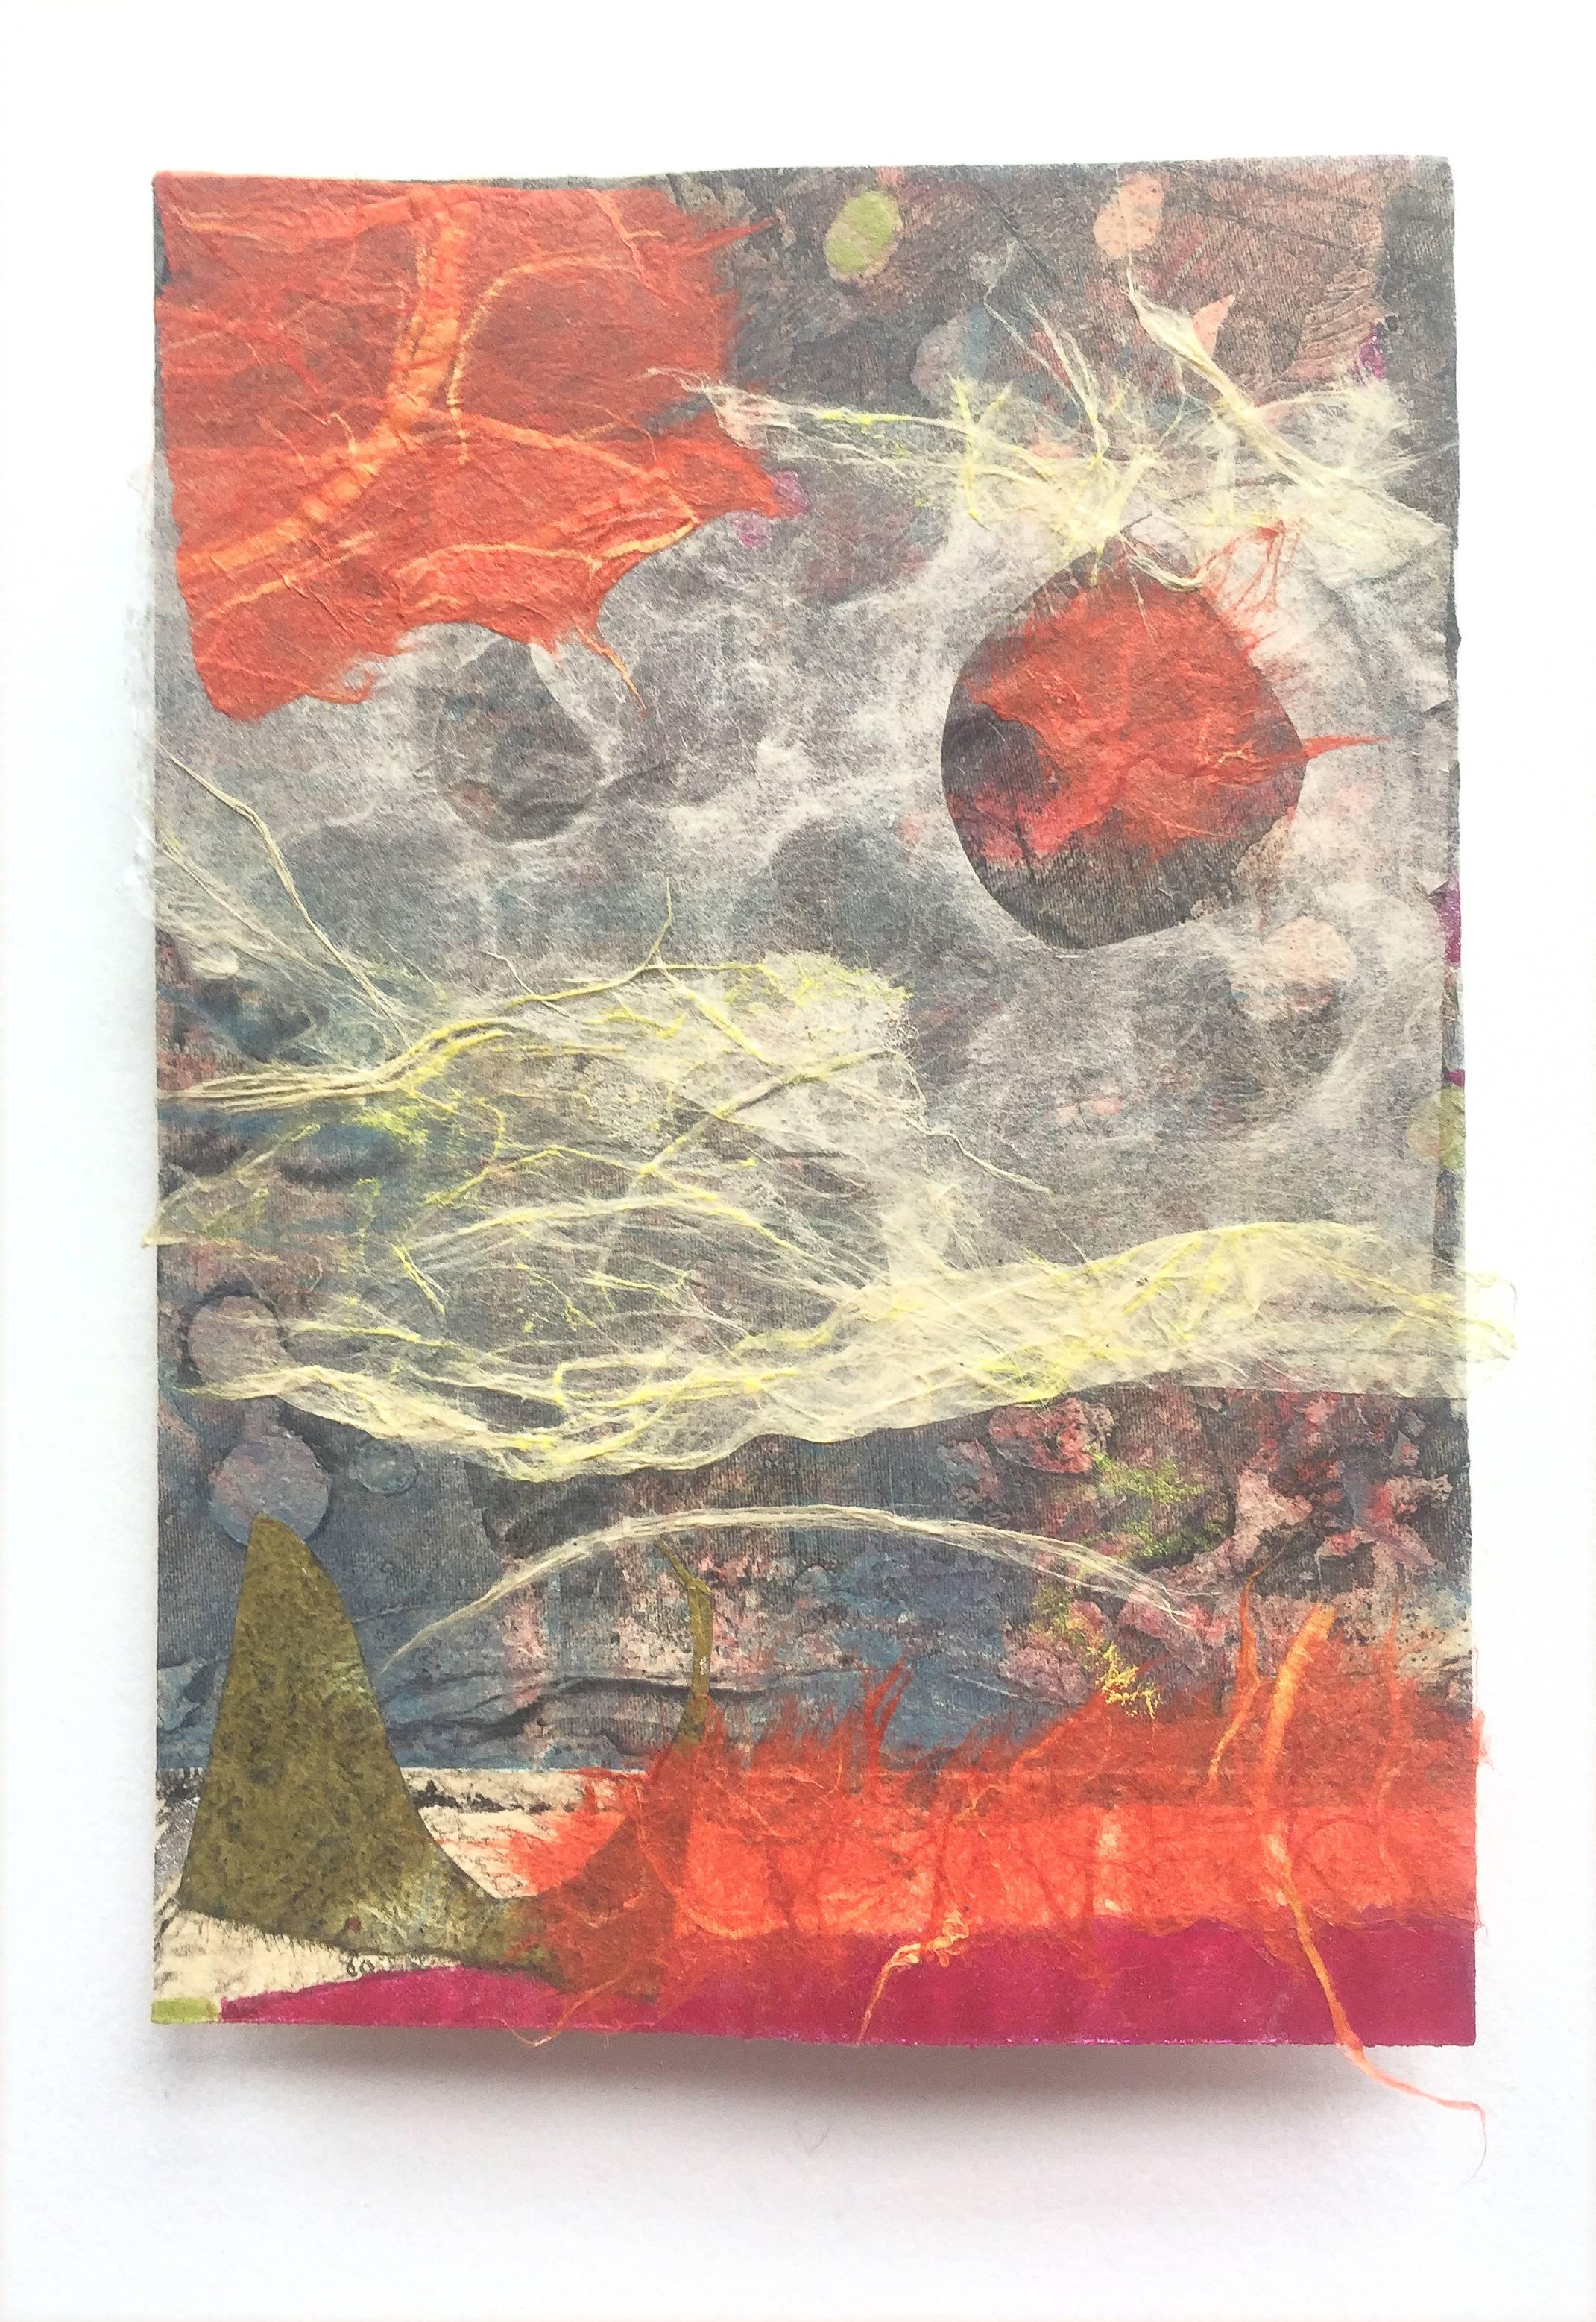 Karin Bruckner Abstract Print - Eruption, mixed media, 4 x 6 inches. Abstract expressionist 